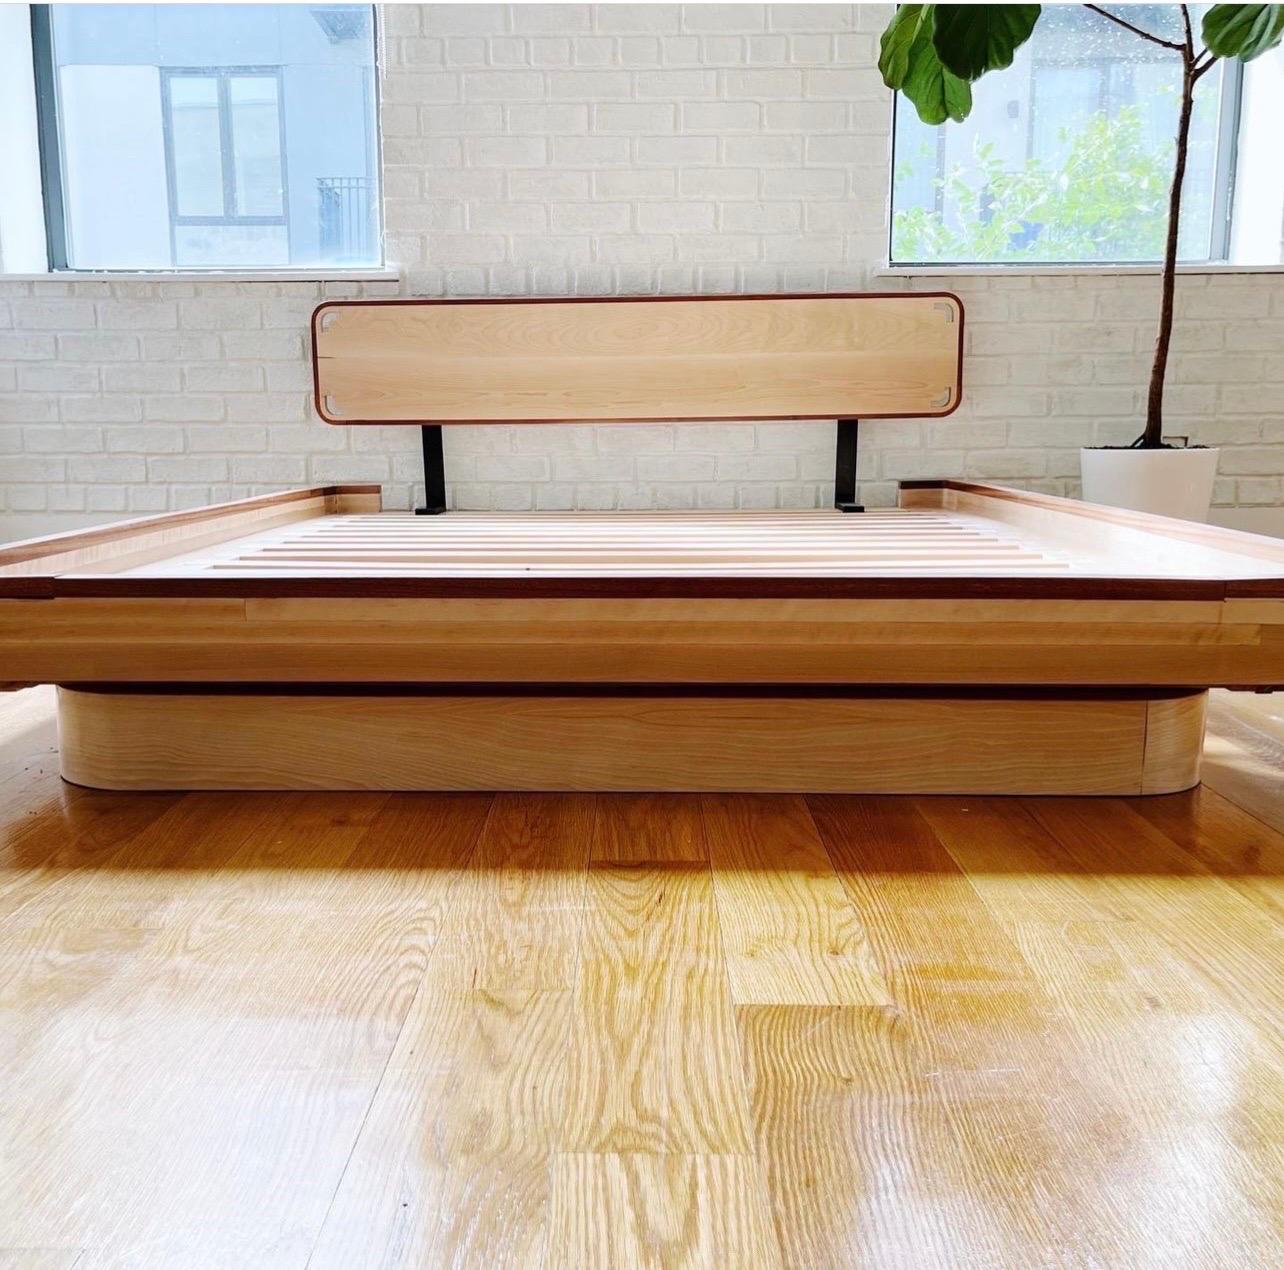 I’m a Brooklyn-based furniture designer. I created this bed with nature in mind. Inspired by soft curves found in nature. The bed is substantial but not overpowering. It’s a great addition to any bedroom adding a light and airy feel. 

This bed